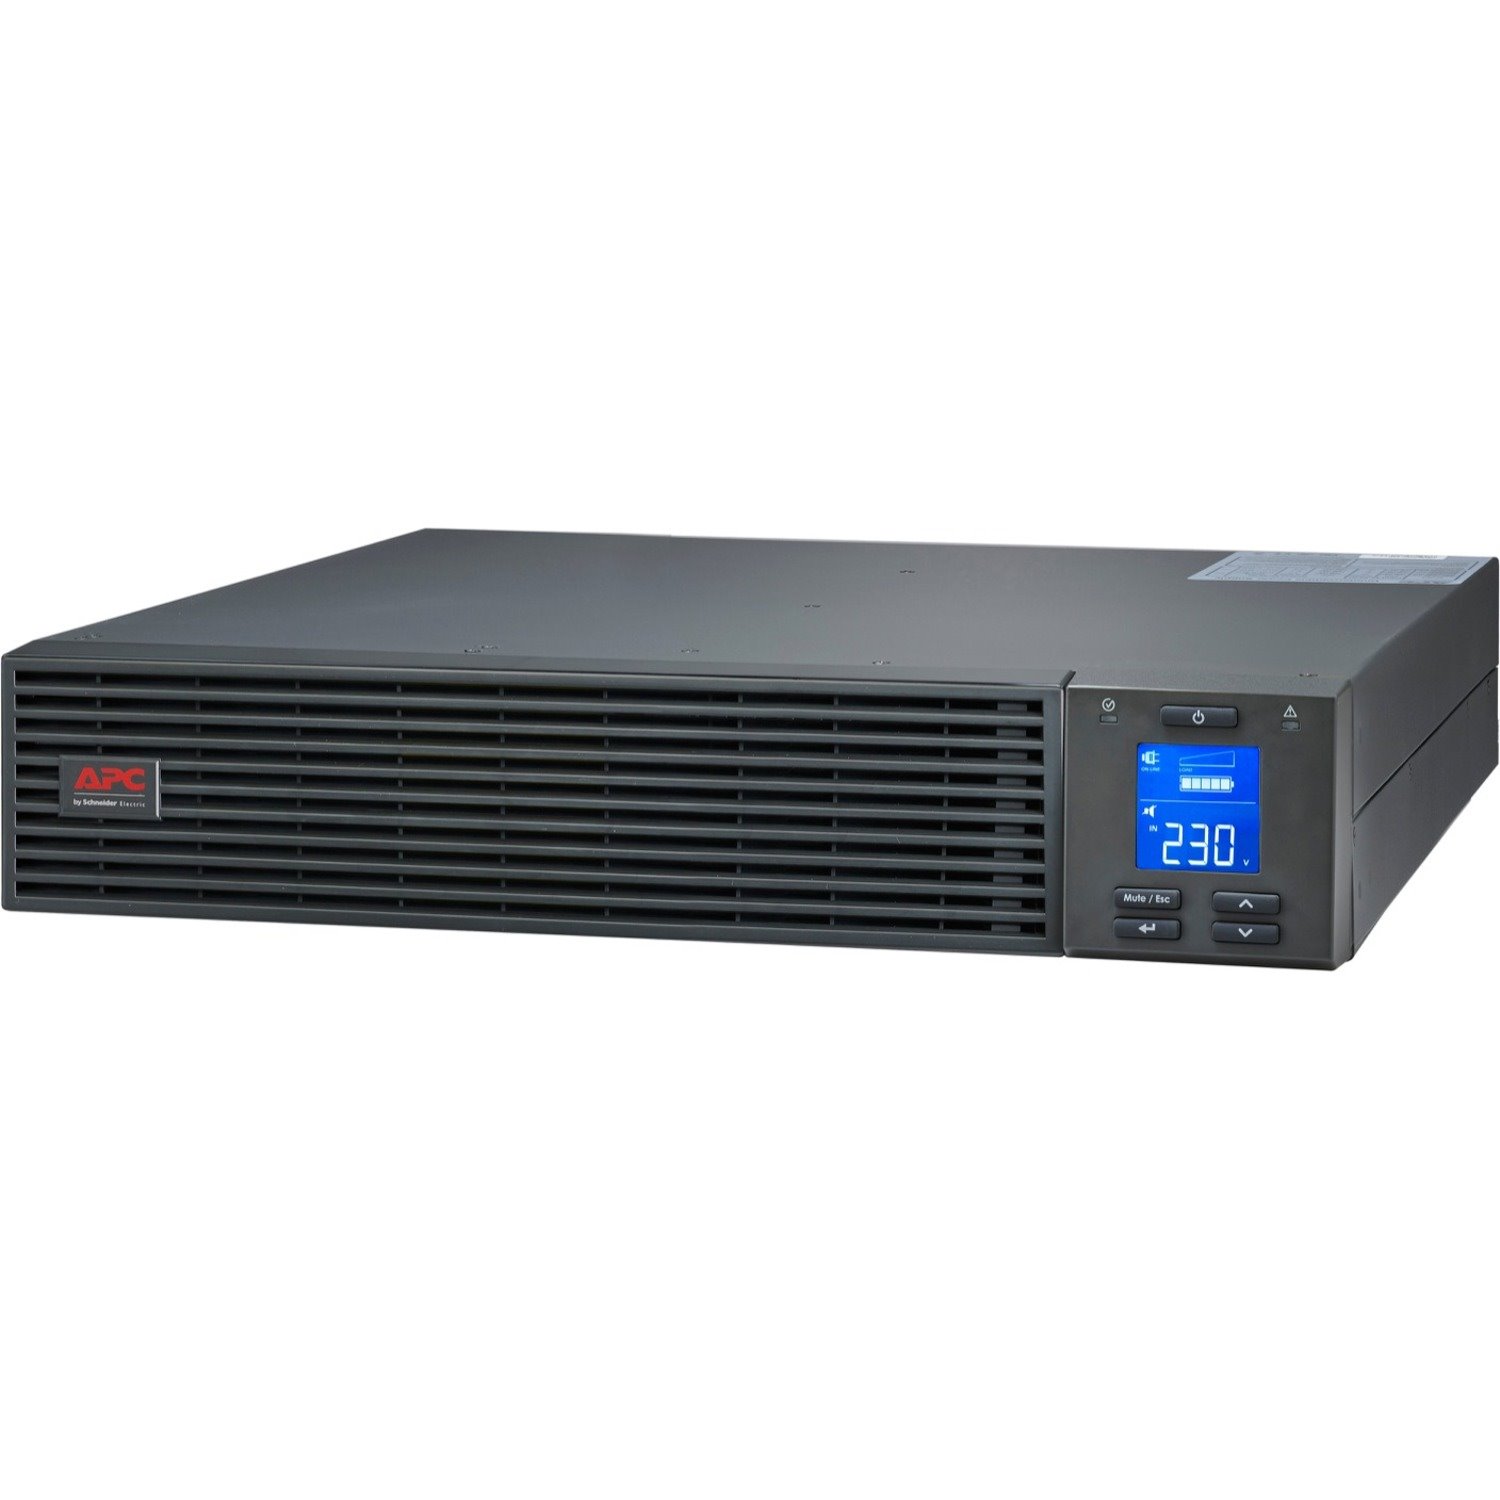 APC by Schneider Electric Easy UPS SRV2KRI Double Conversion Online UPS - 2 kVA/1.60 kW